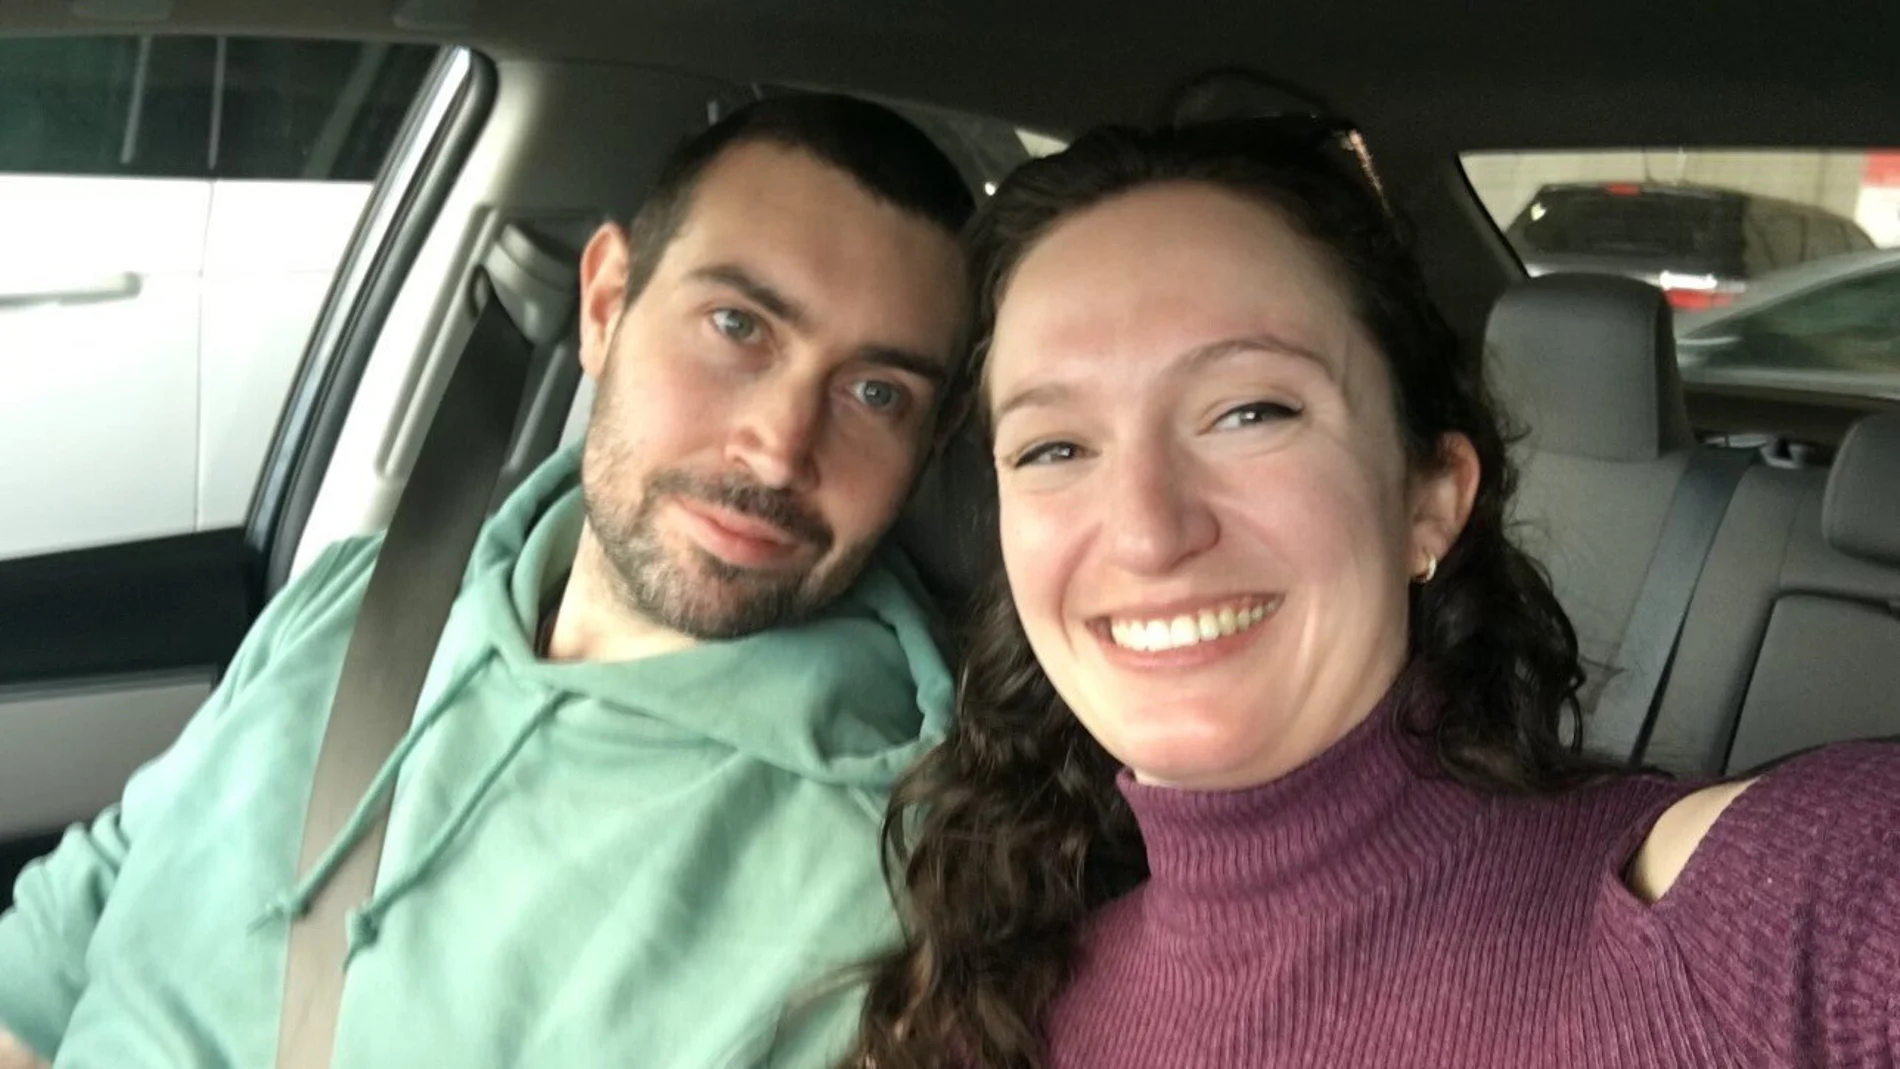 This undated photo provided by Brookhaven Police Dept. shows Matthew Willson, 31, of Chertsey, Surrey, England, with his girlfriend Katherine Shepard. A stray bullet struck and killed Wilson, an English astrophysicist, while he was inside an Atlanta-area apartment on Sunday, Jan. 16, 2022. Police say the death was the result of â€œrecklessâ€ gunfire by random individuals. (Brookhaven Police Dept via AP)